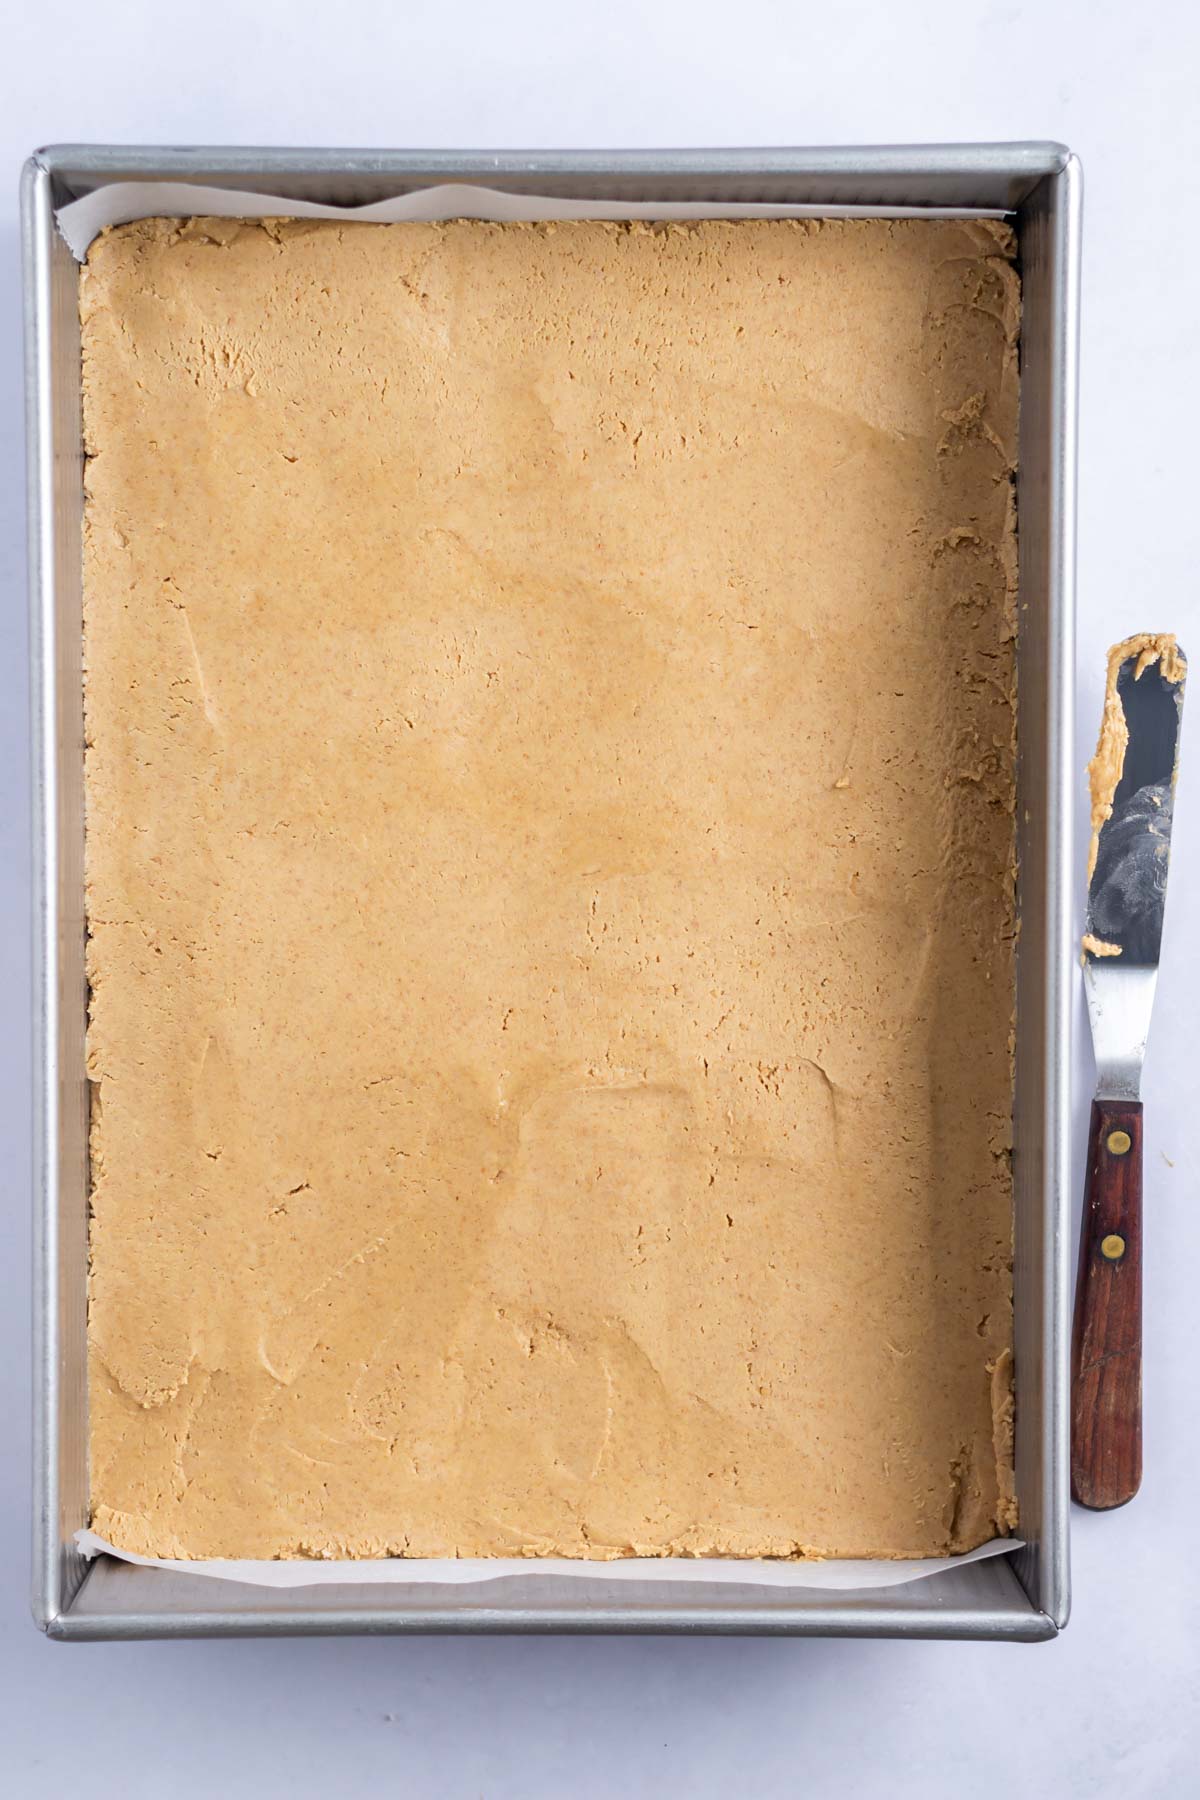 peanut butter layer spread in the bottom of a baking pan